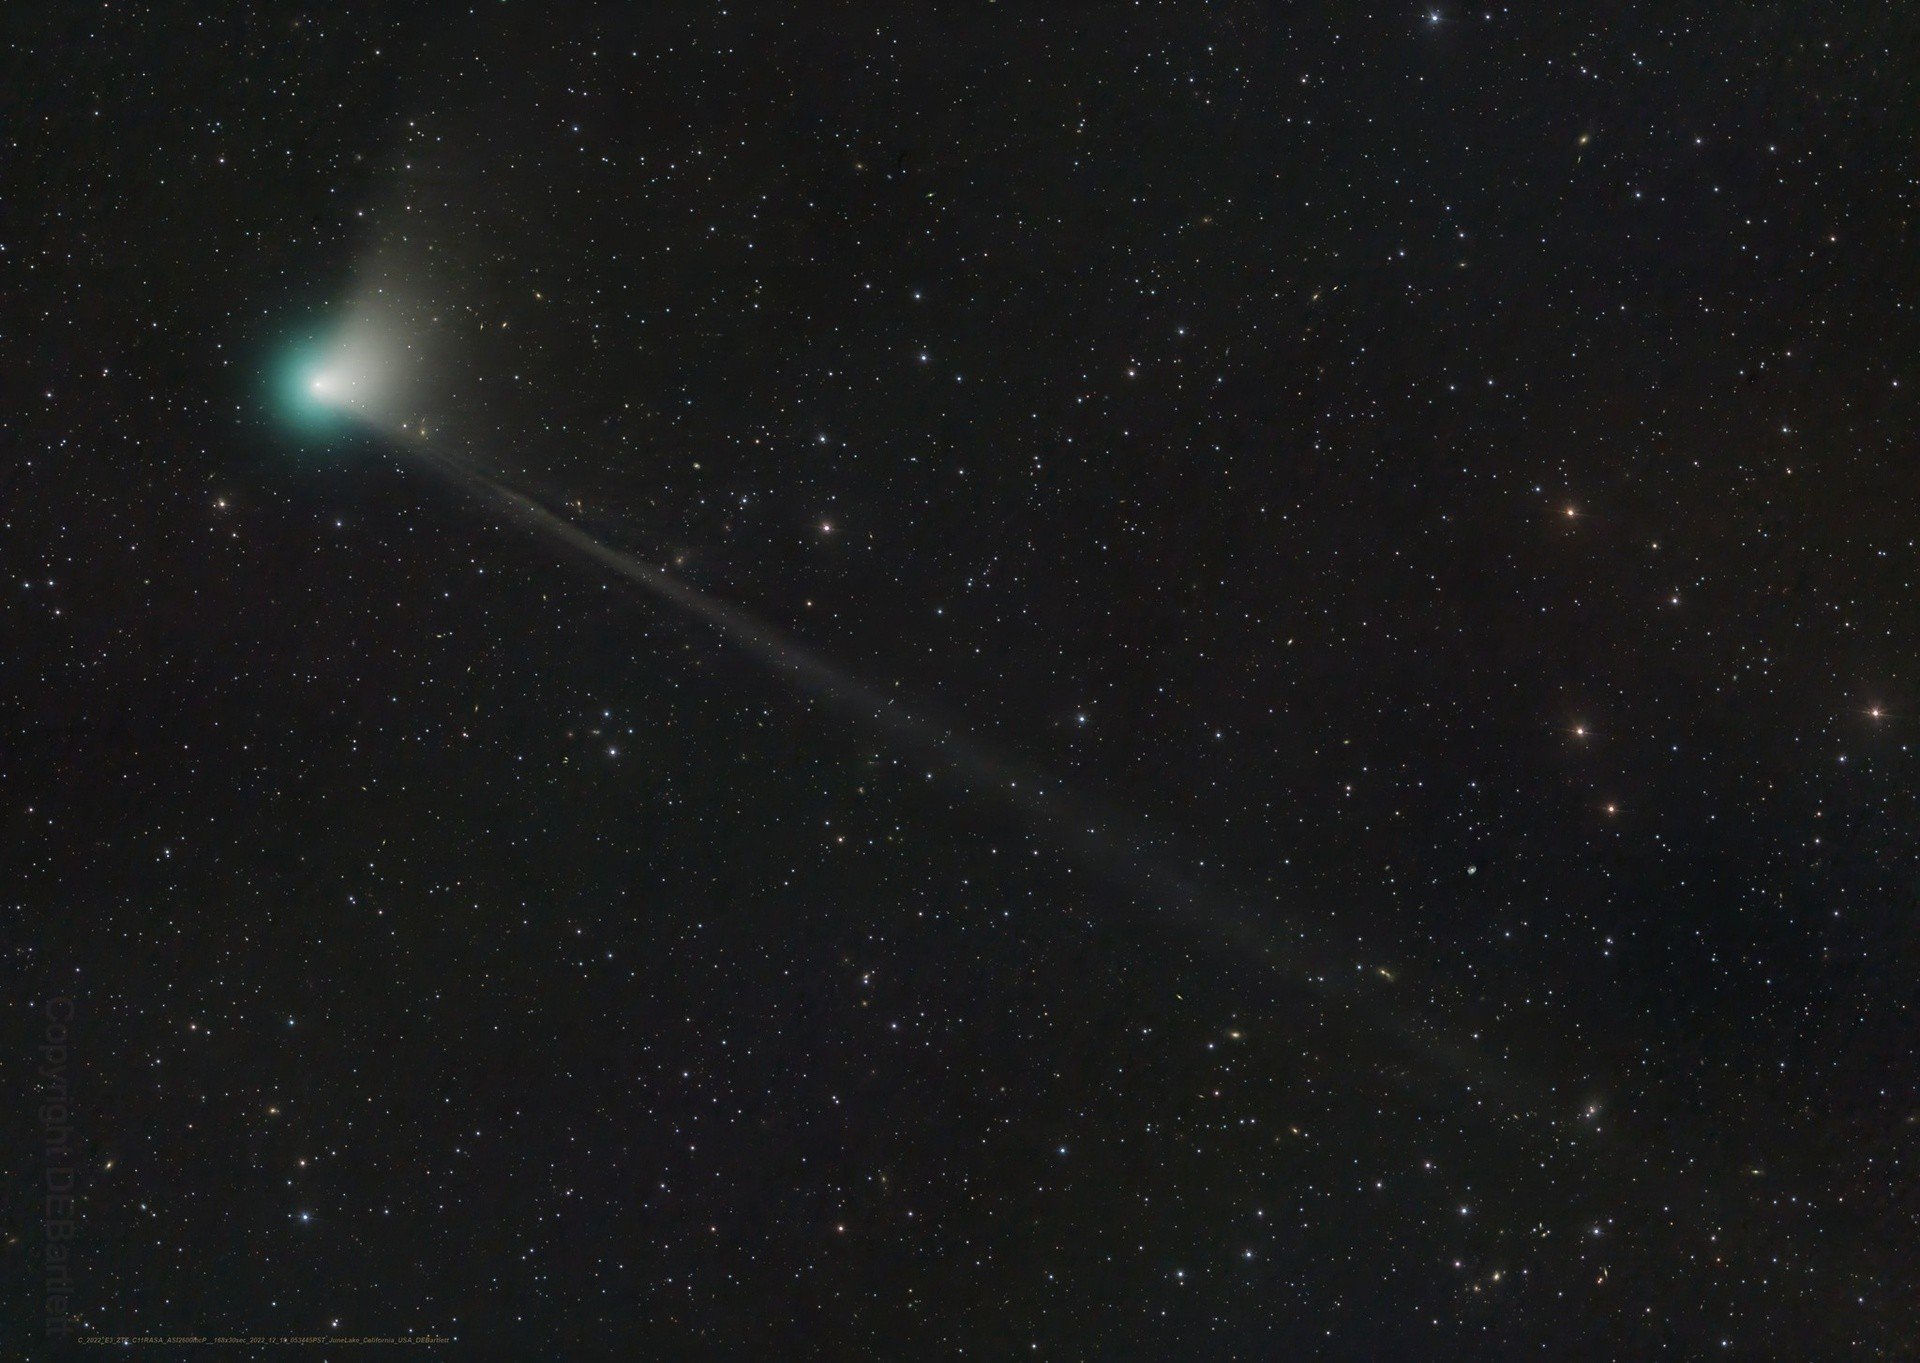 50 thousand years passed.  Comet C/2022 E3 (ZTF) visible from Earth again!  It is a once in a lifetime opportunity.  Watch the comet pass live